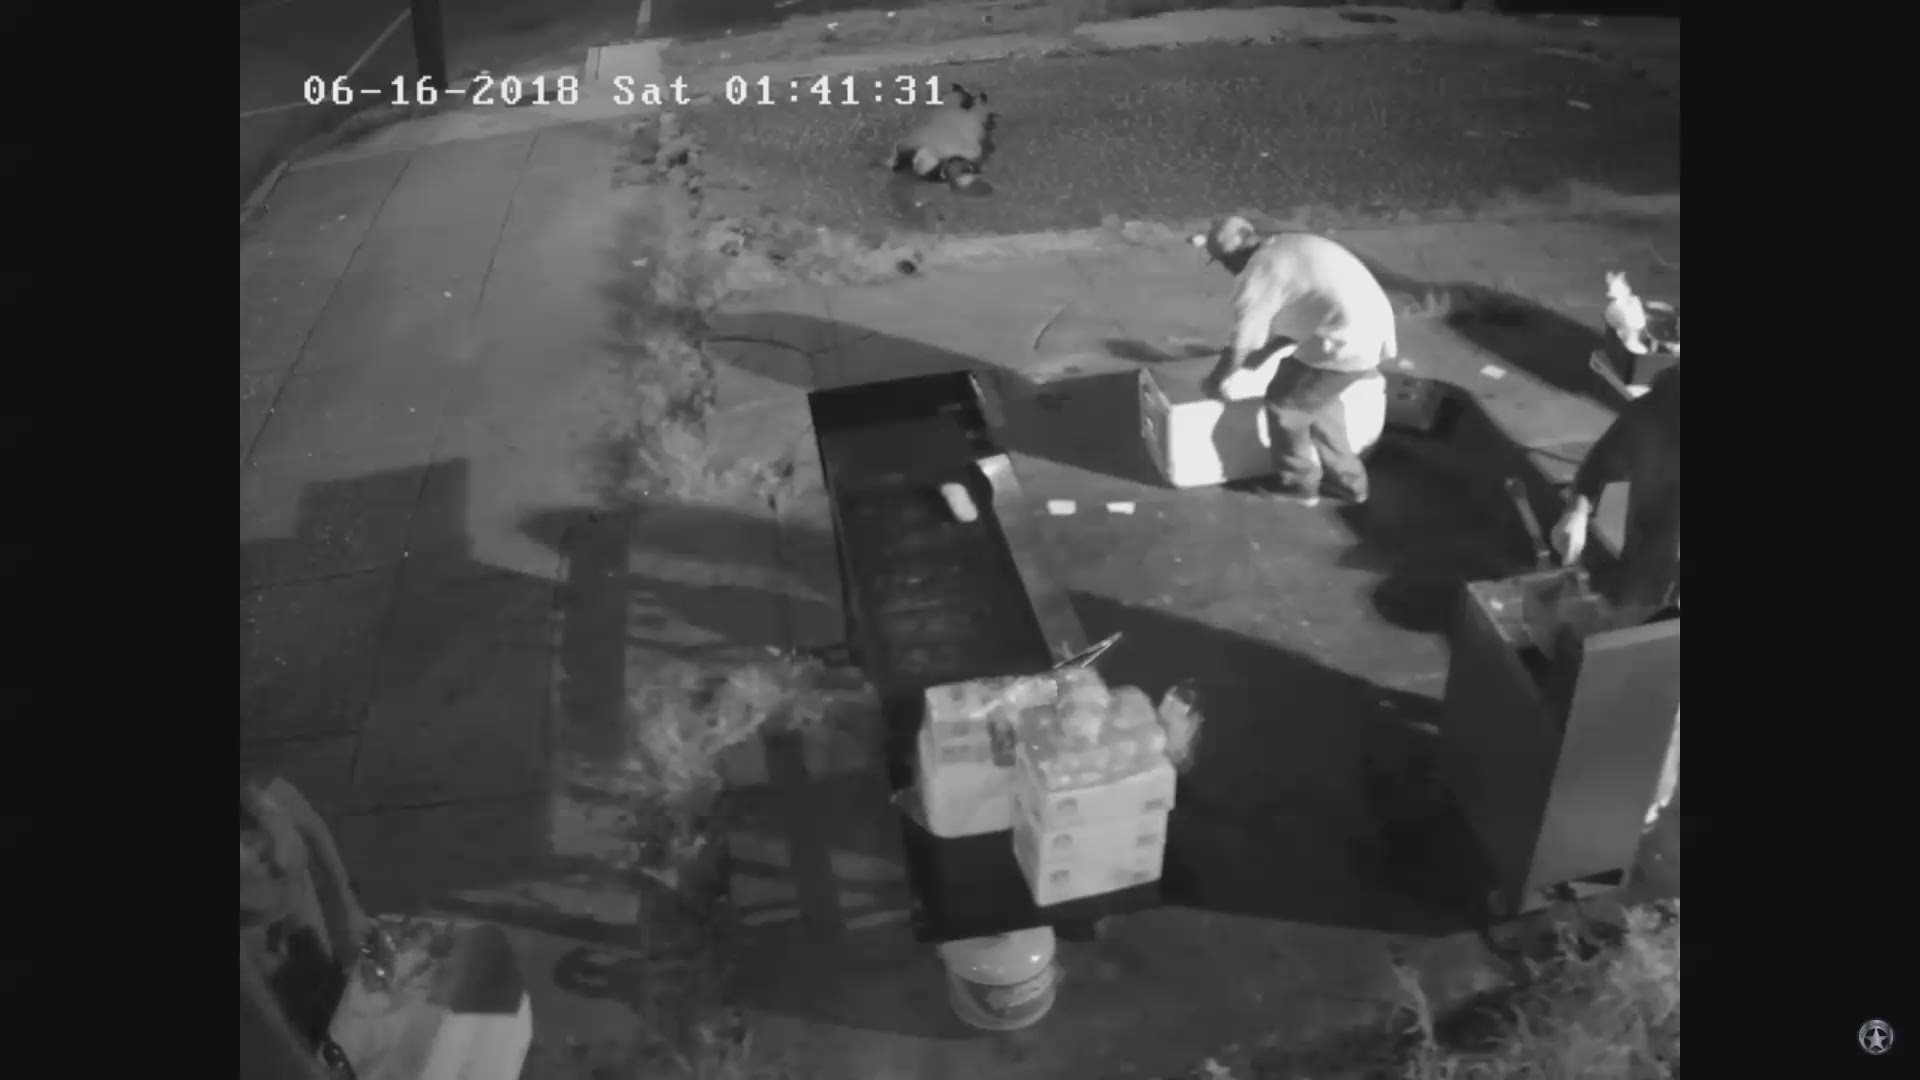 Playing out over just a few seconds, surveillance video from the 1900 block of Orleans in Treme shows an alarming assault.